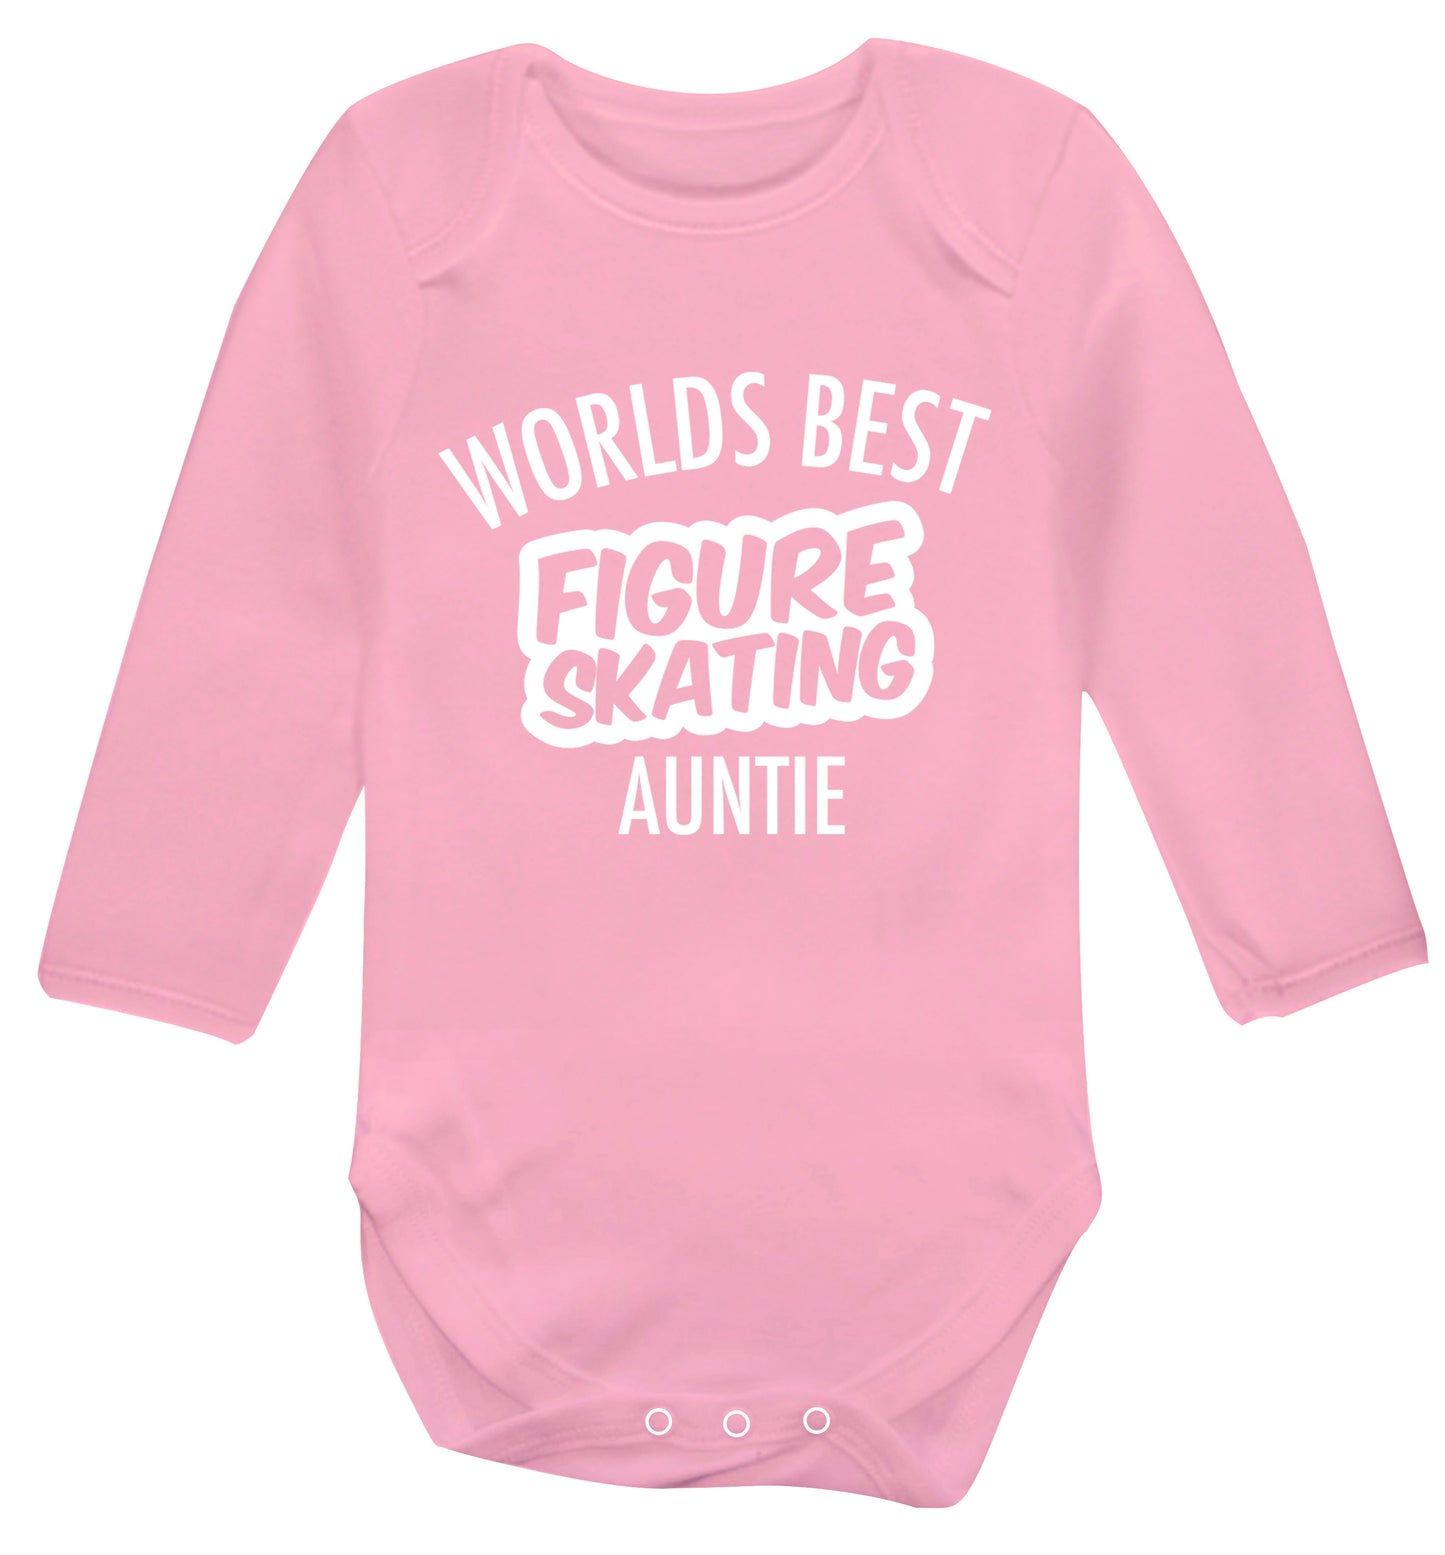 Worlds best figure skating auntie Baby Vest long sleeved pale pink 6-12 months